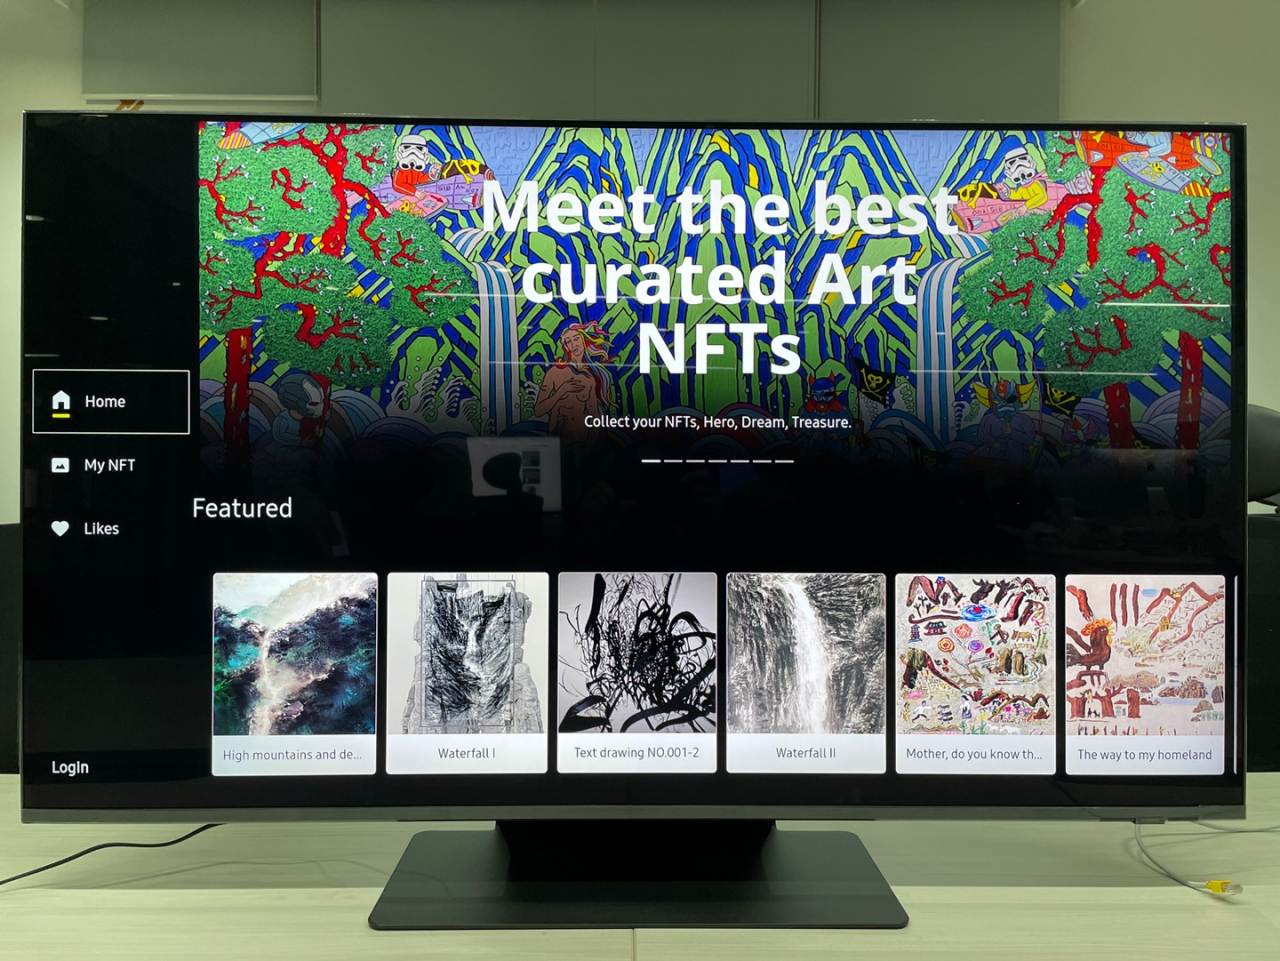 Samsung's 2022 Smart TVs to support cloud gaming, video chat and even NFTs